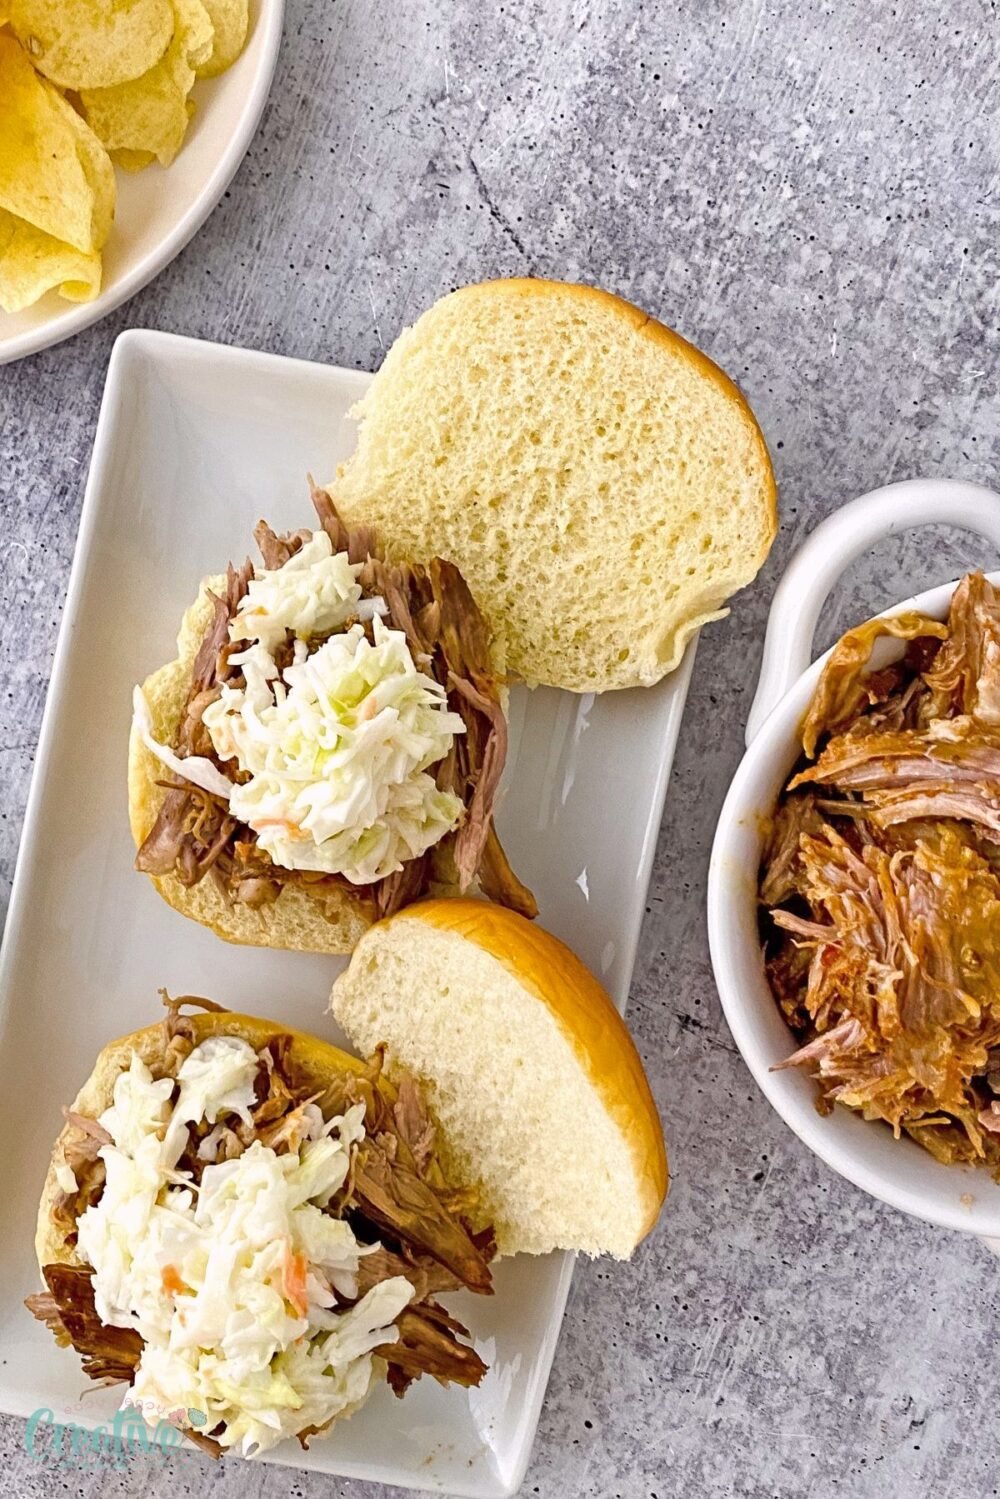 Enjoy the ease of making tender Barbecue pork roast in slow cooker in with this simple recipe. Perfect for satisfying your pulled pork cravings!